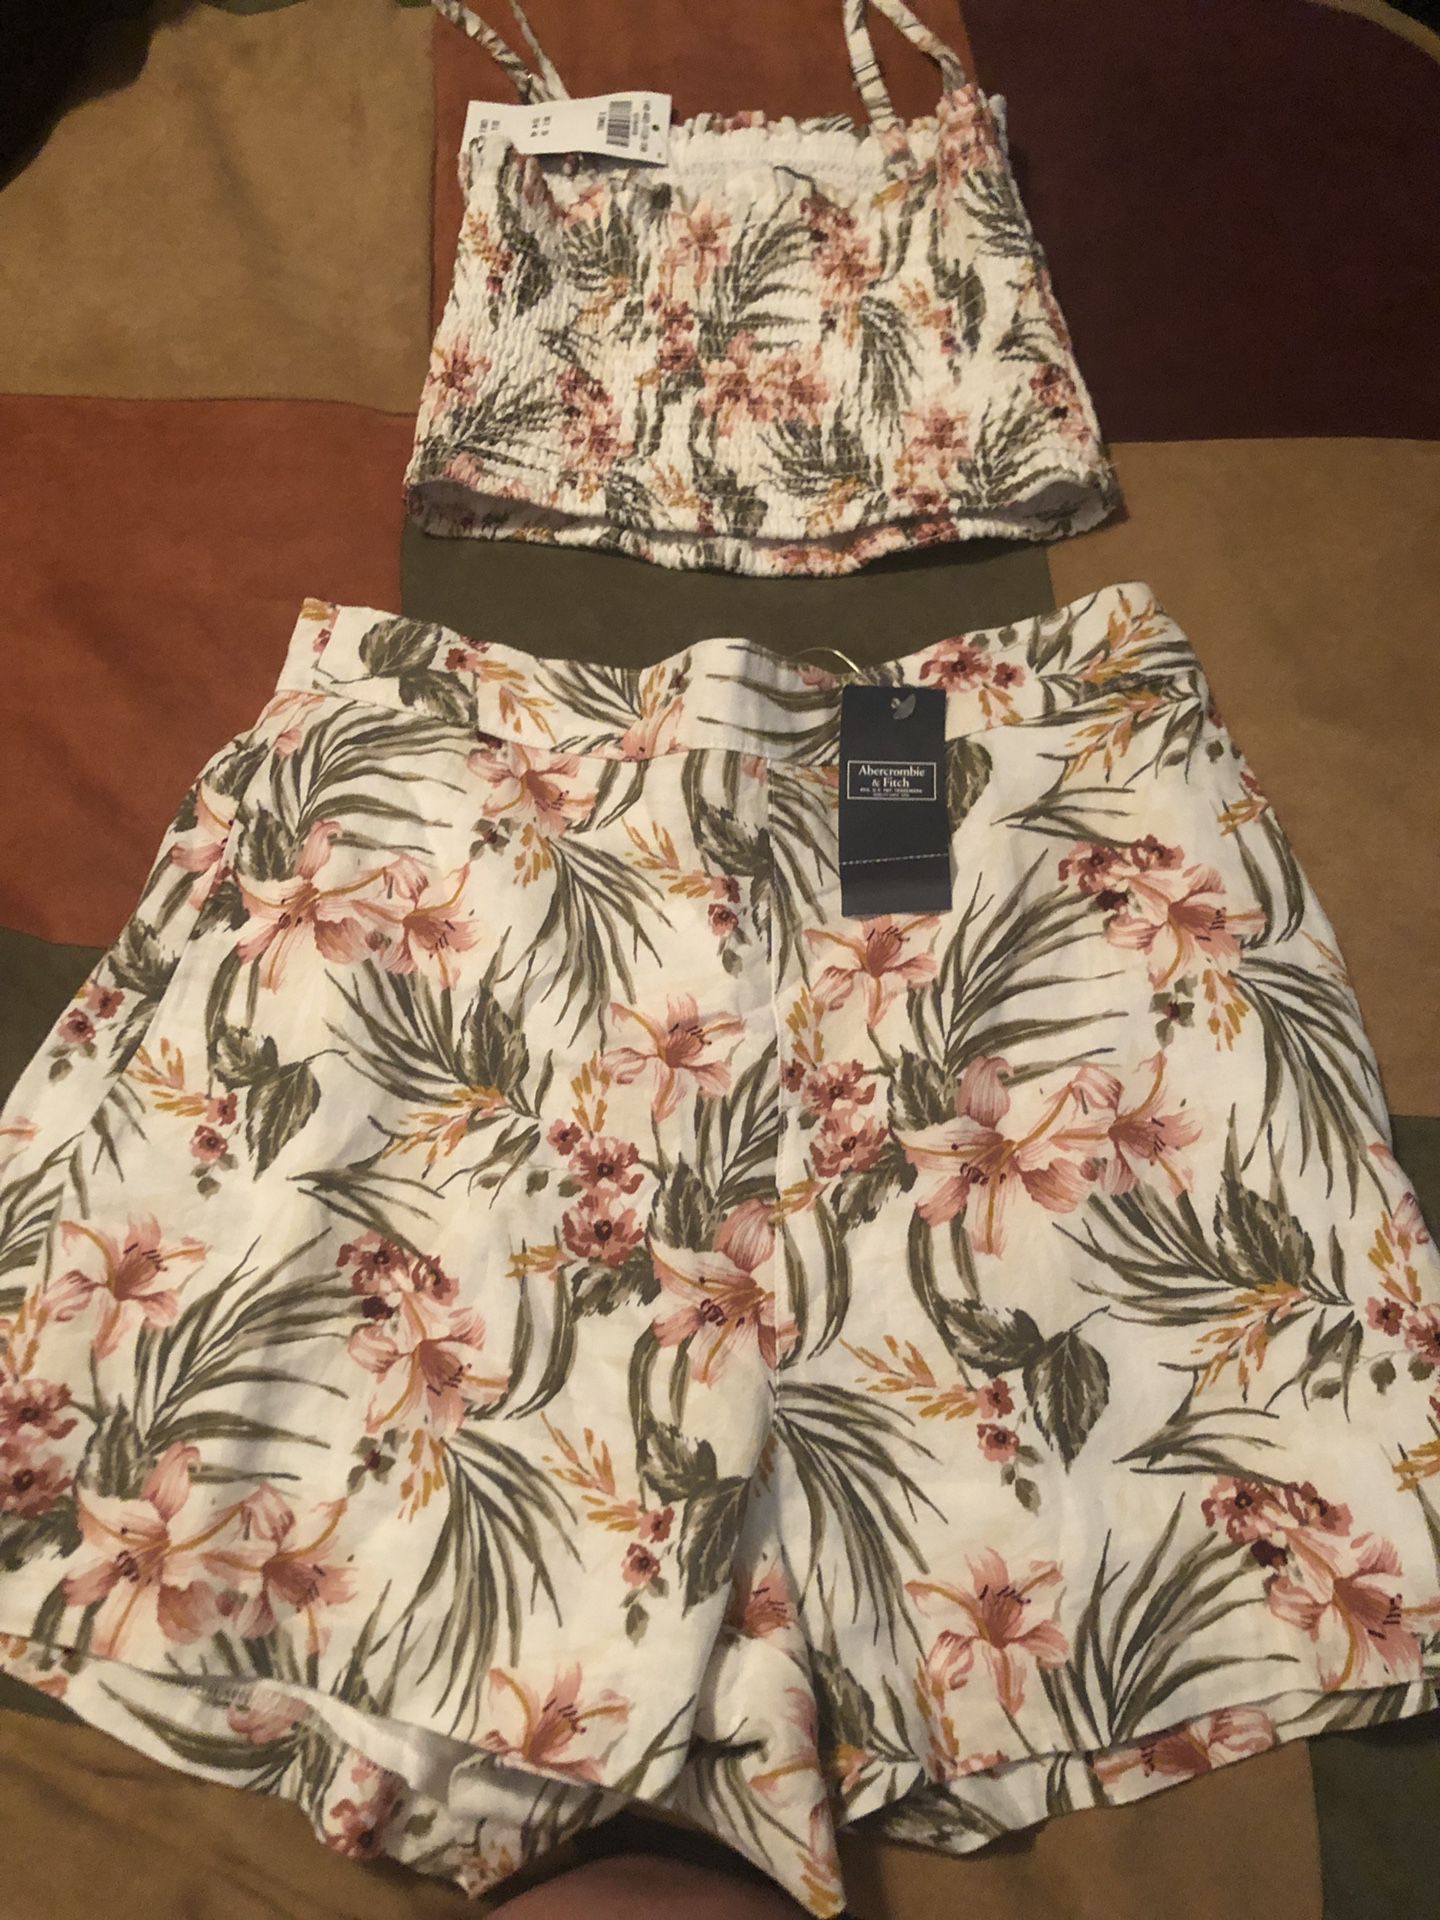 NWT xsmall Abercrombie and Fitch outfit